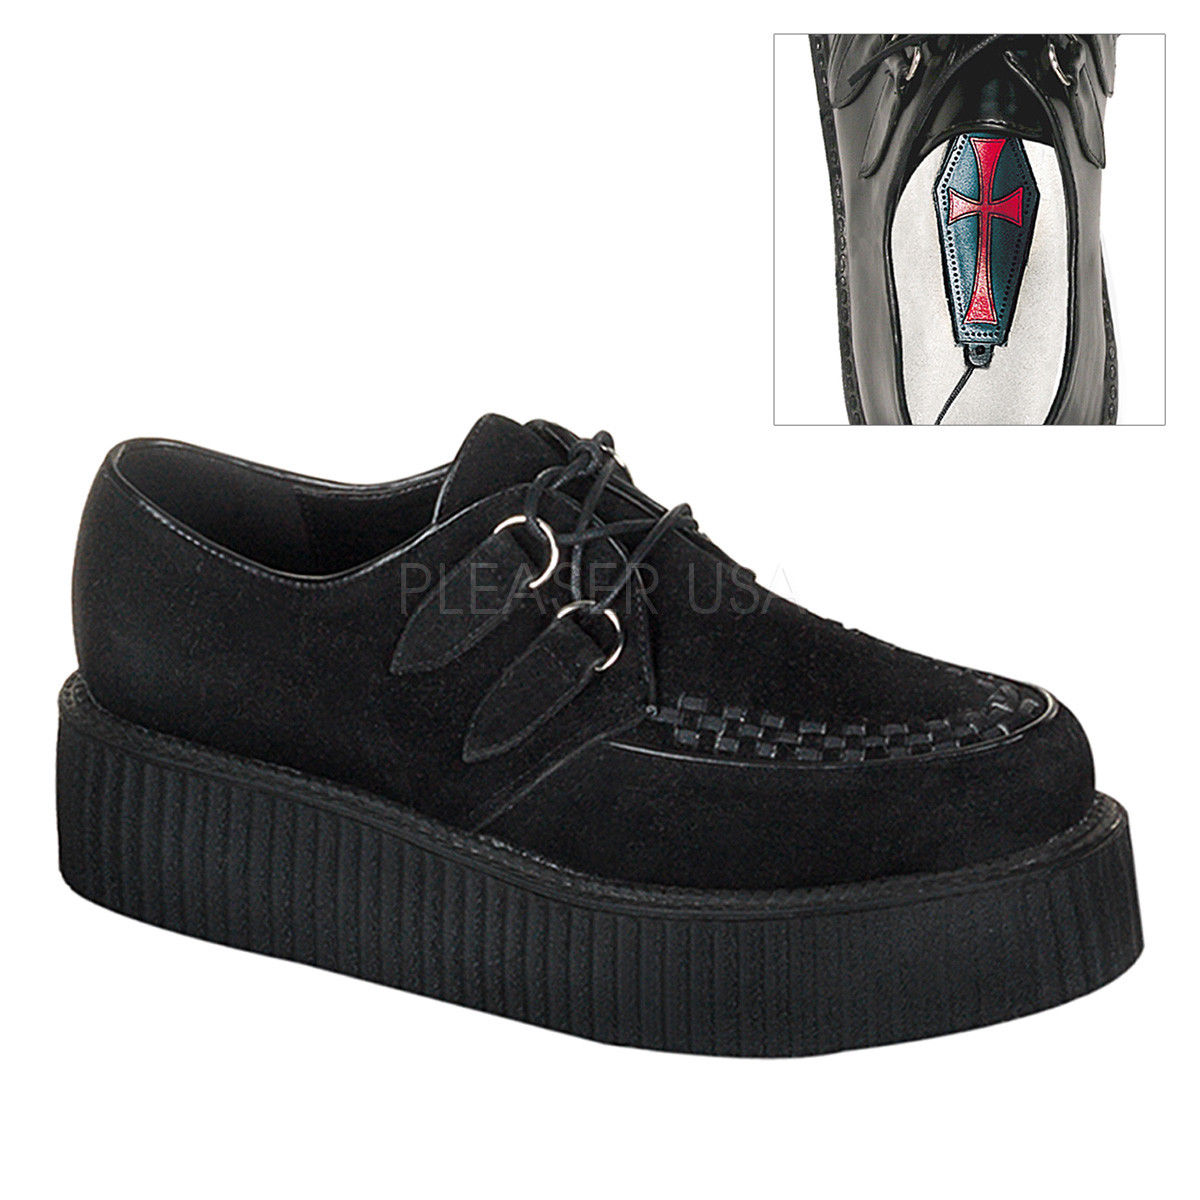 DEMONIA Creeper-402S Black Real Suede Men's Unisex Goth Punk Creepers Shoes - A Shoe Addiction